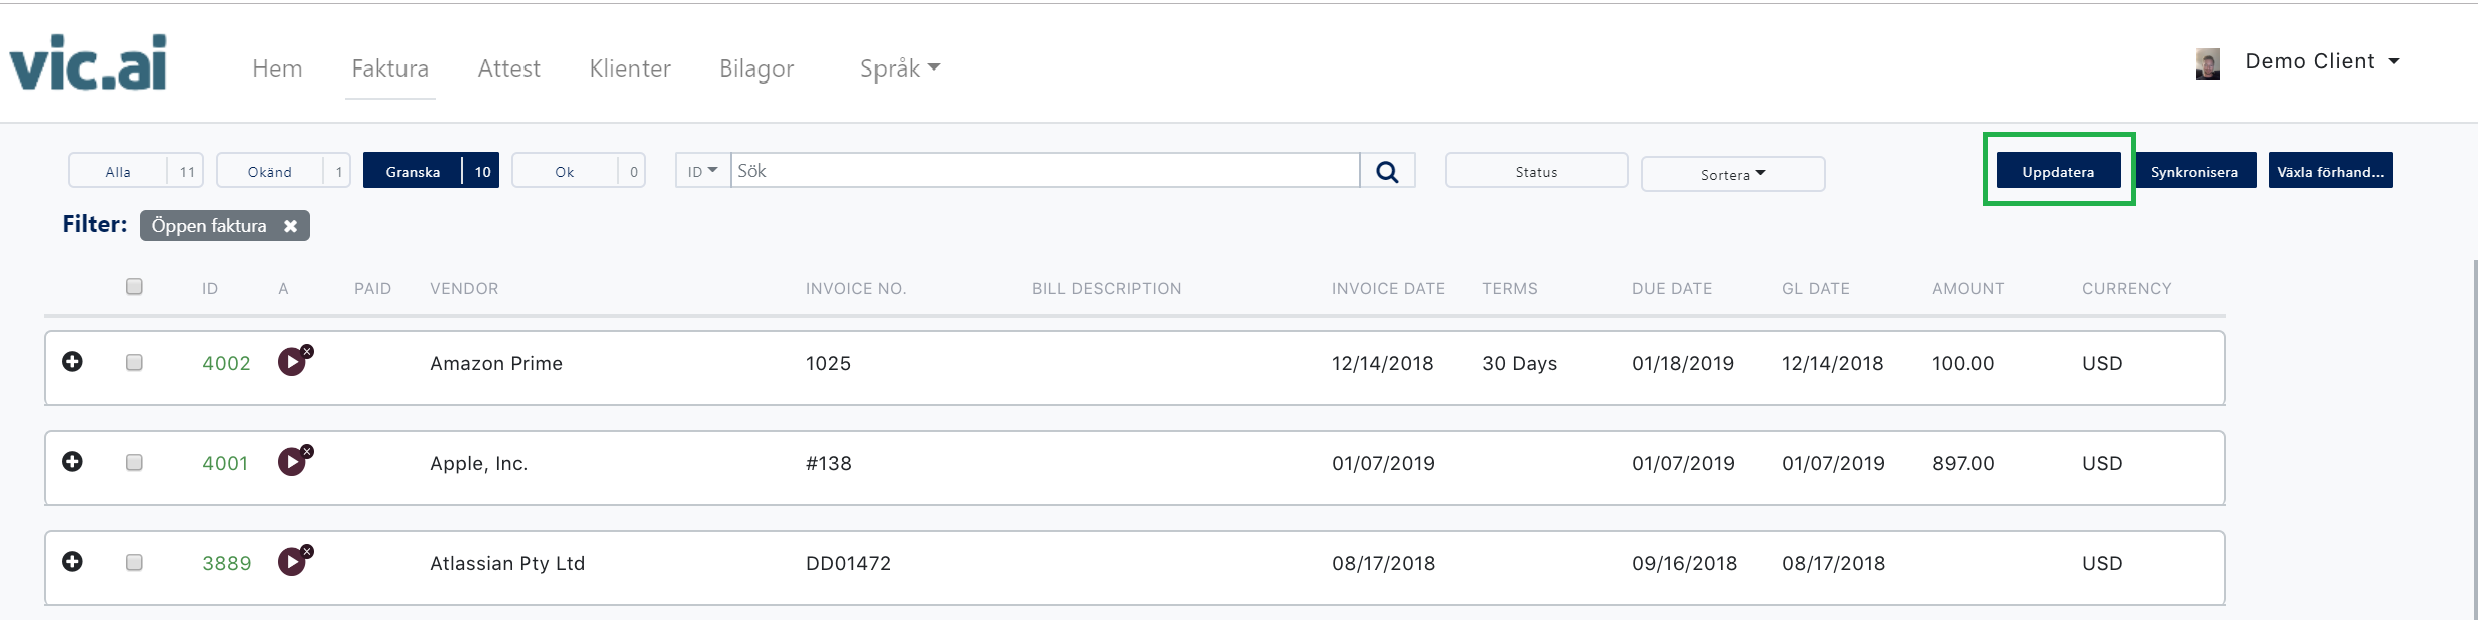 Vic_ai_Dashboard_Invoice_Overview_3.png